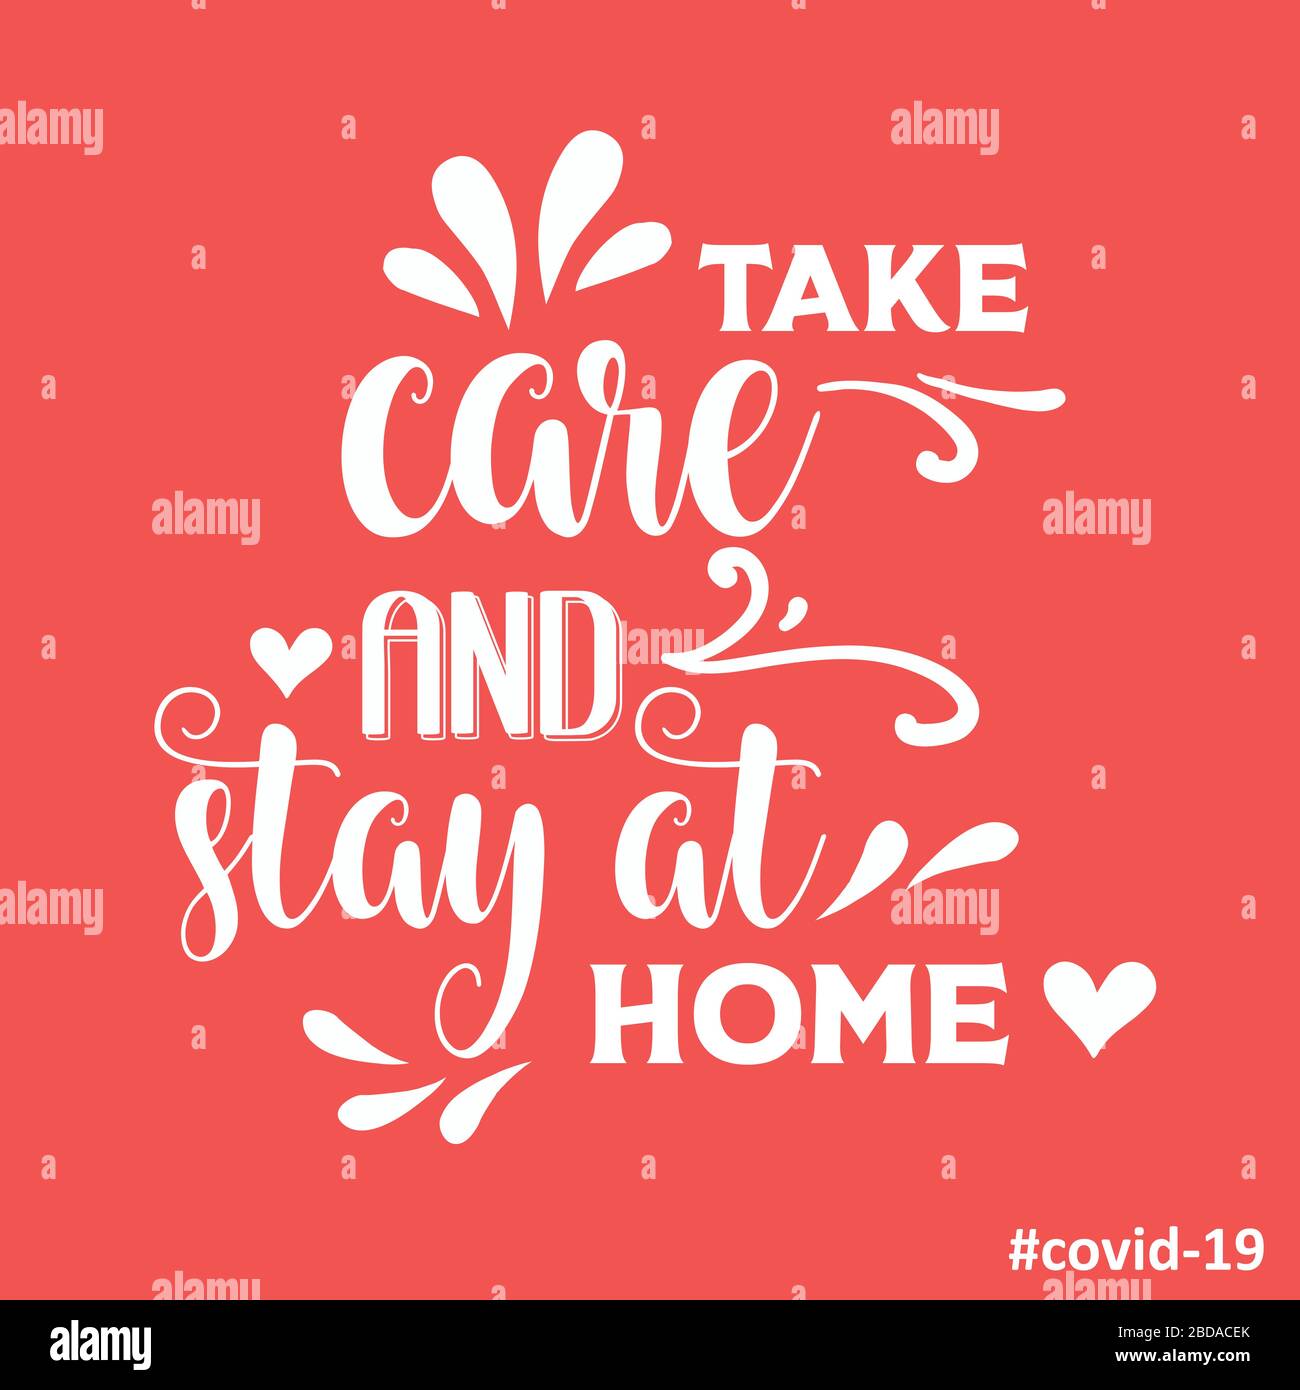 'Take care and stay at home'-coronavirus advice, Covid-19 poster. Vector Stock Vector